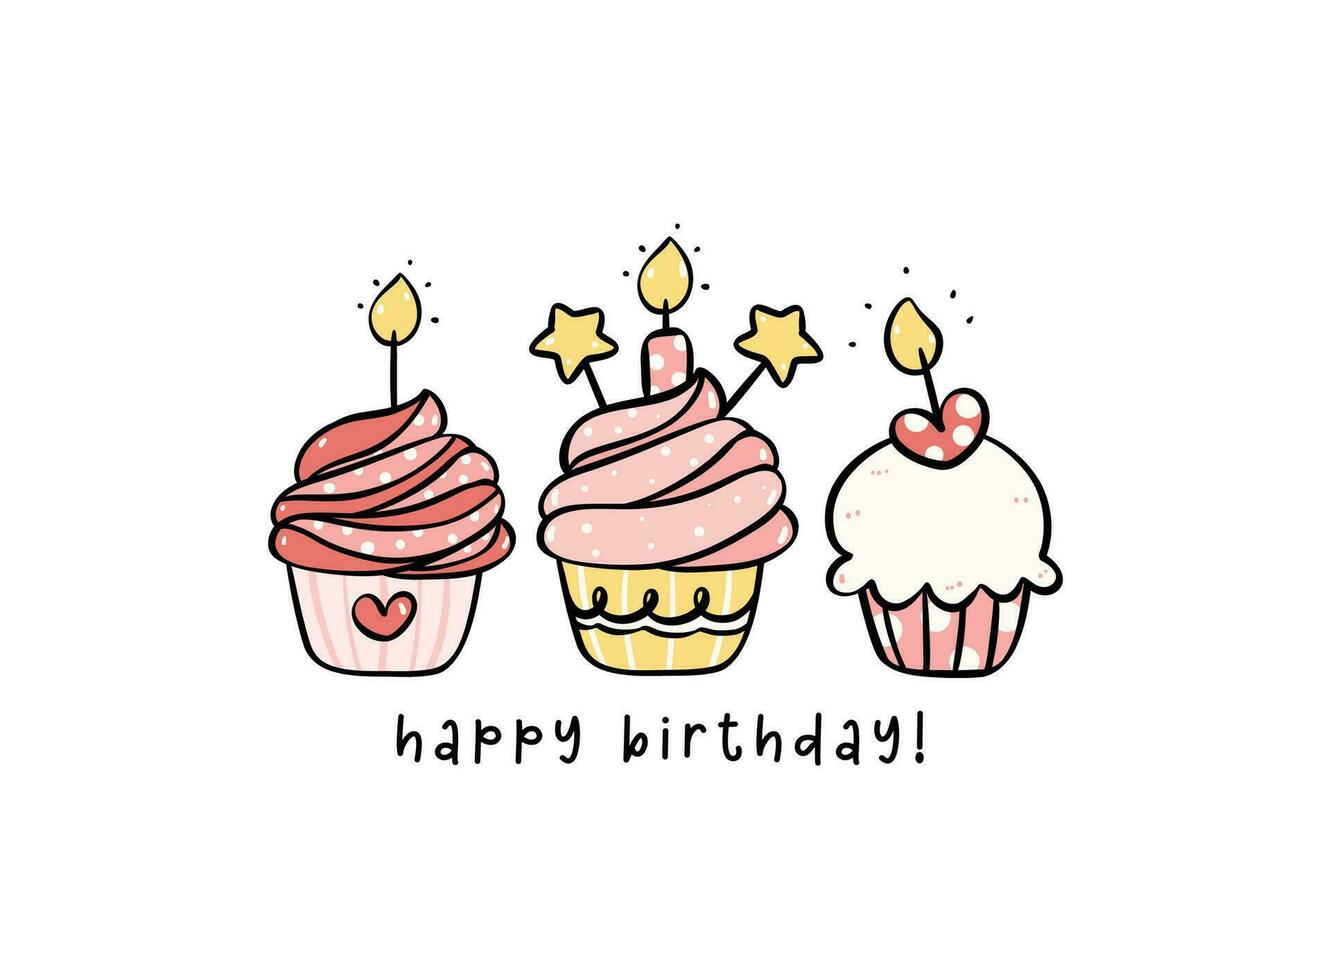 Group of Cute Pink Birthday Cakes with candles minimal Doodle, Celebrate party with cute cake illustration hand drawing perfect for greeting cards. vector